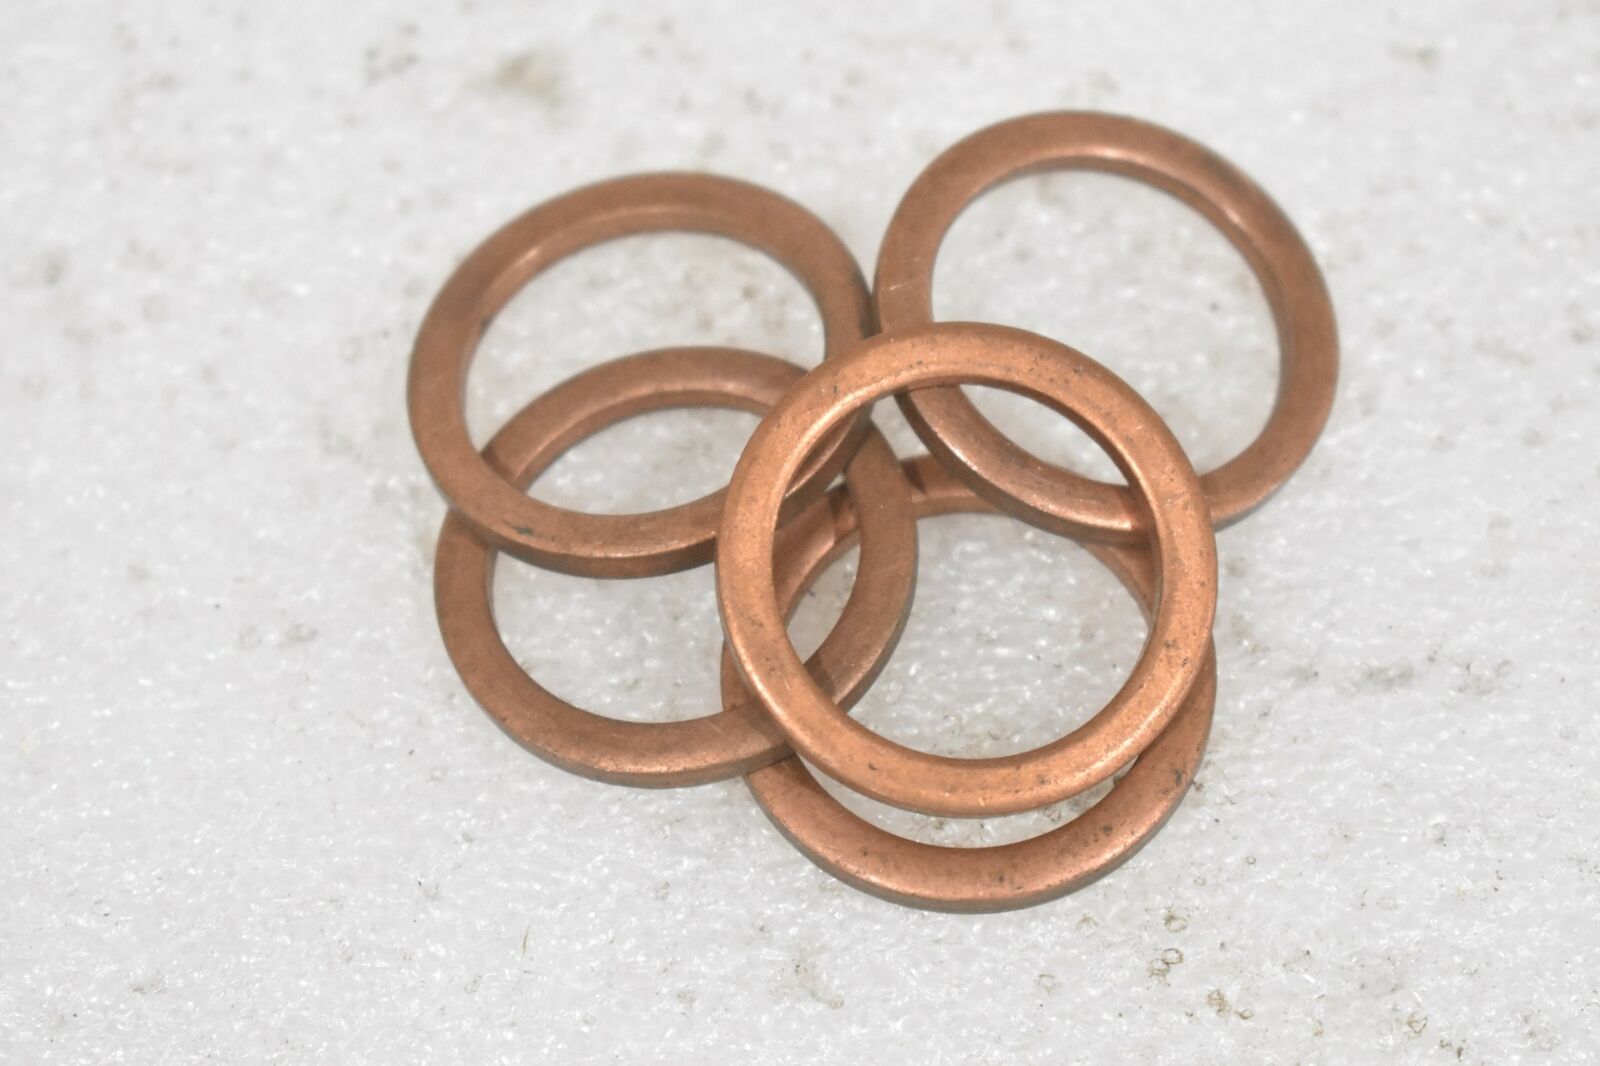 EATON AIRFLEX 82X11 C2 ROTOR SEAL SOFT COPPER GASKET ( LOT OF 5 )